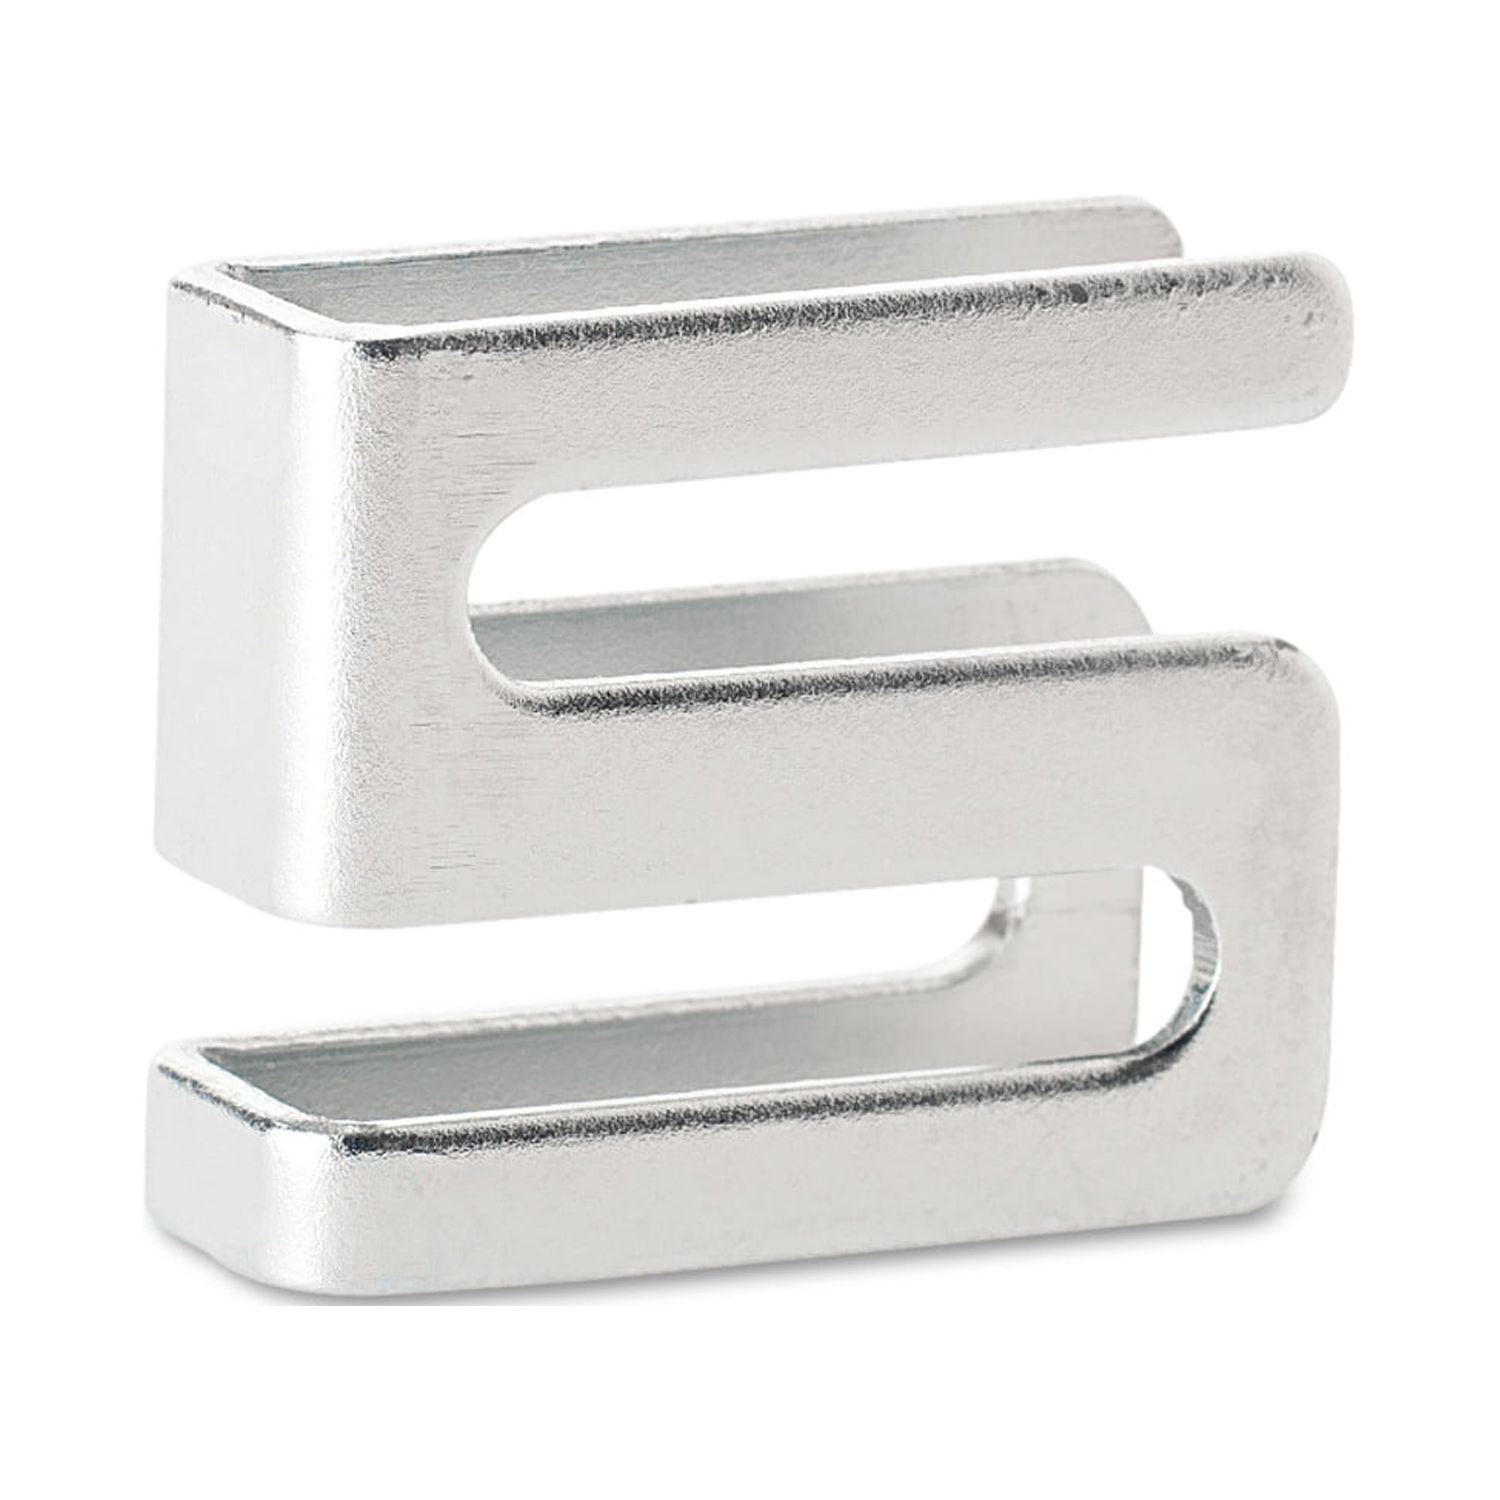 3 Wire Shelving Hooks - Silver- 4 Pack